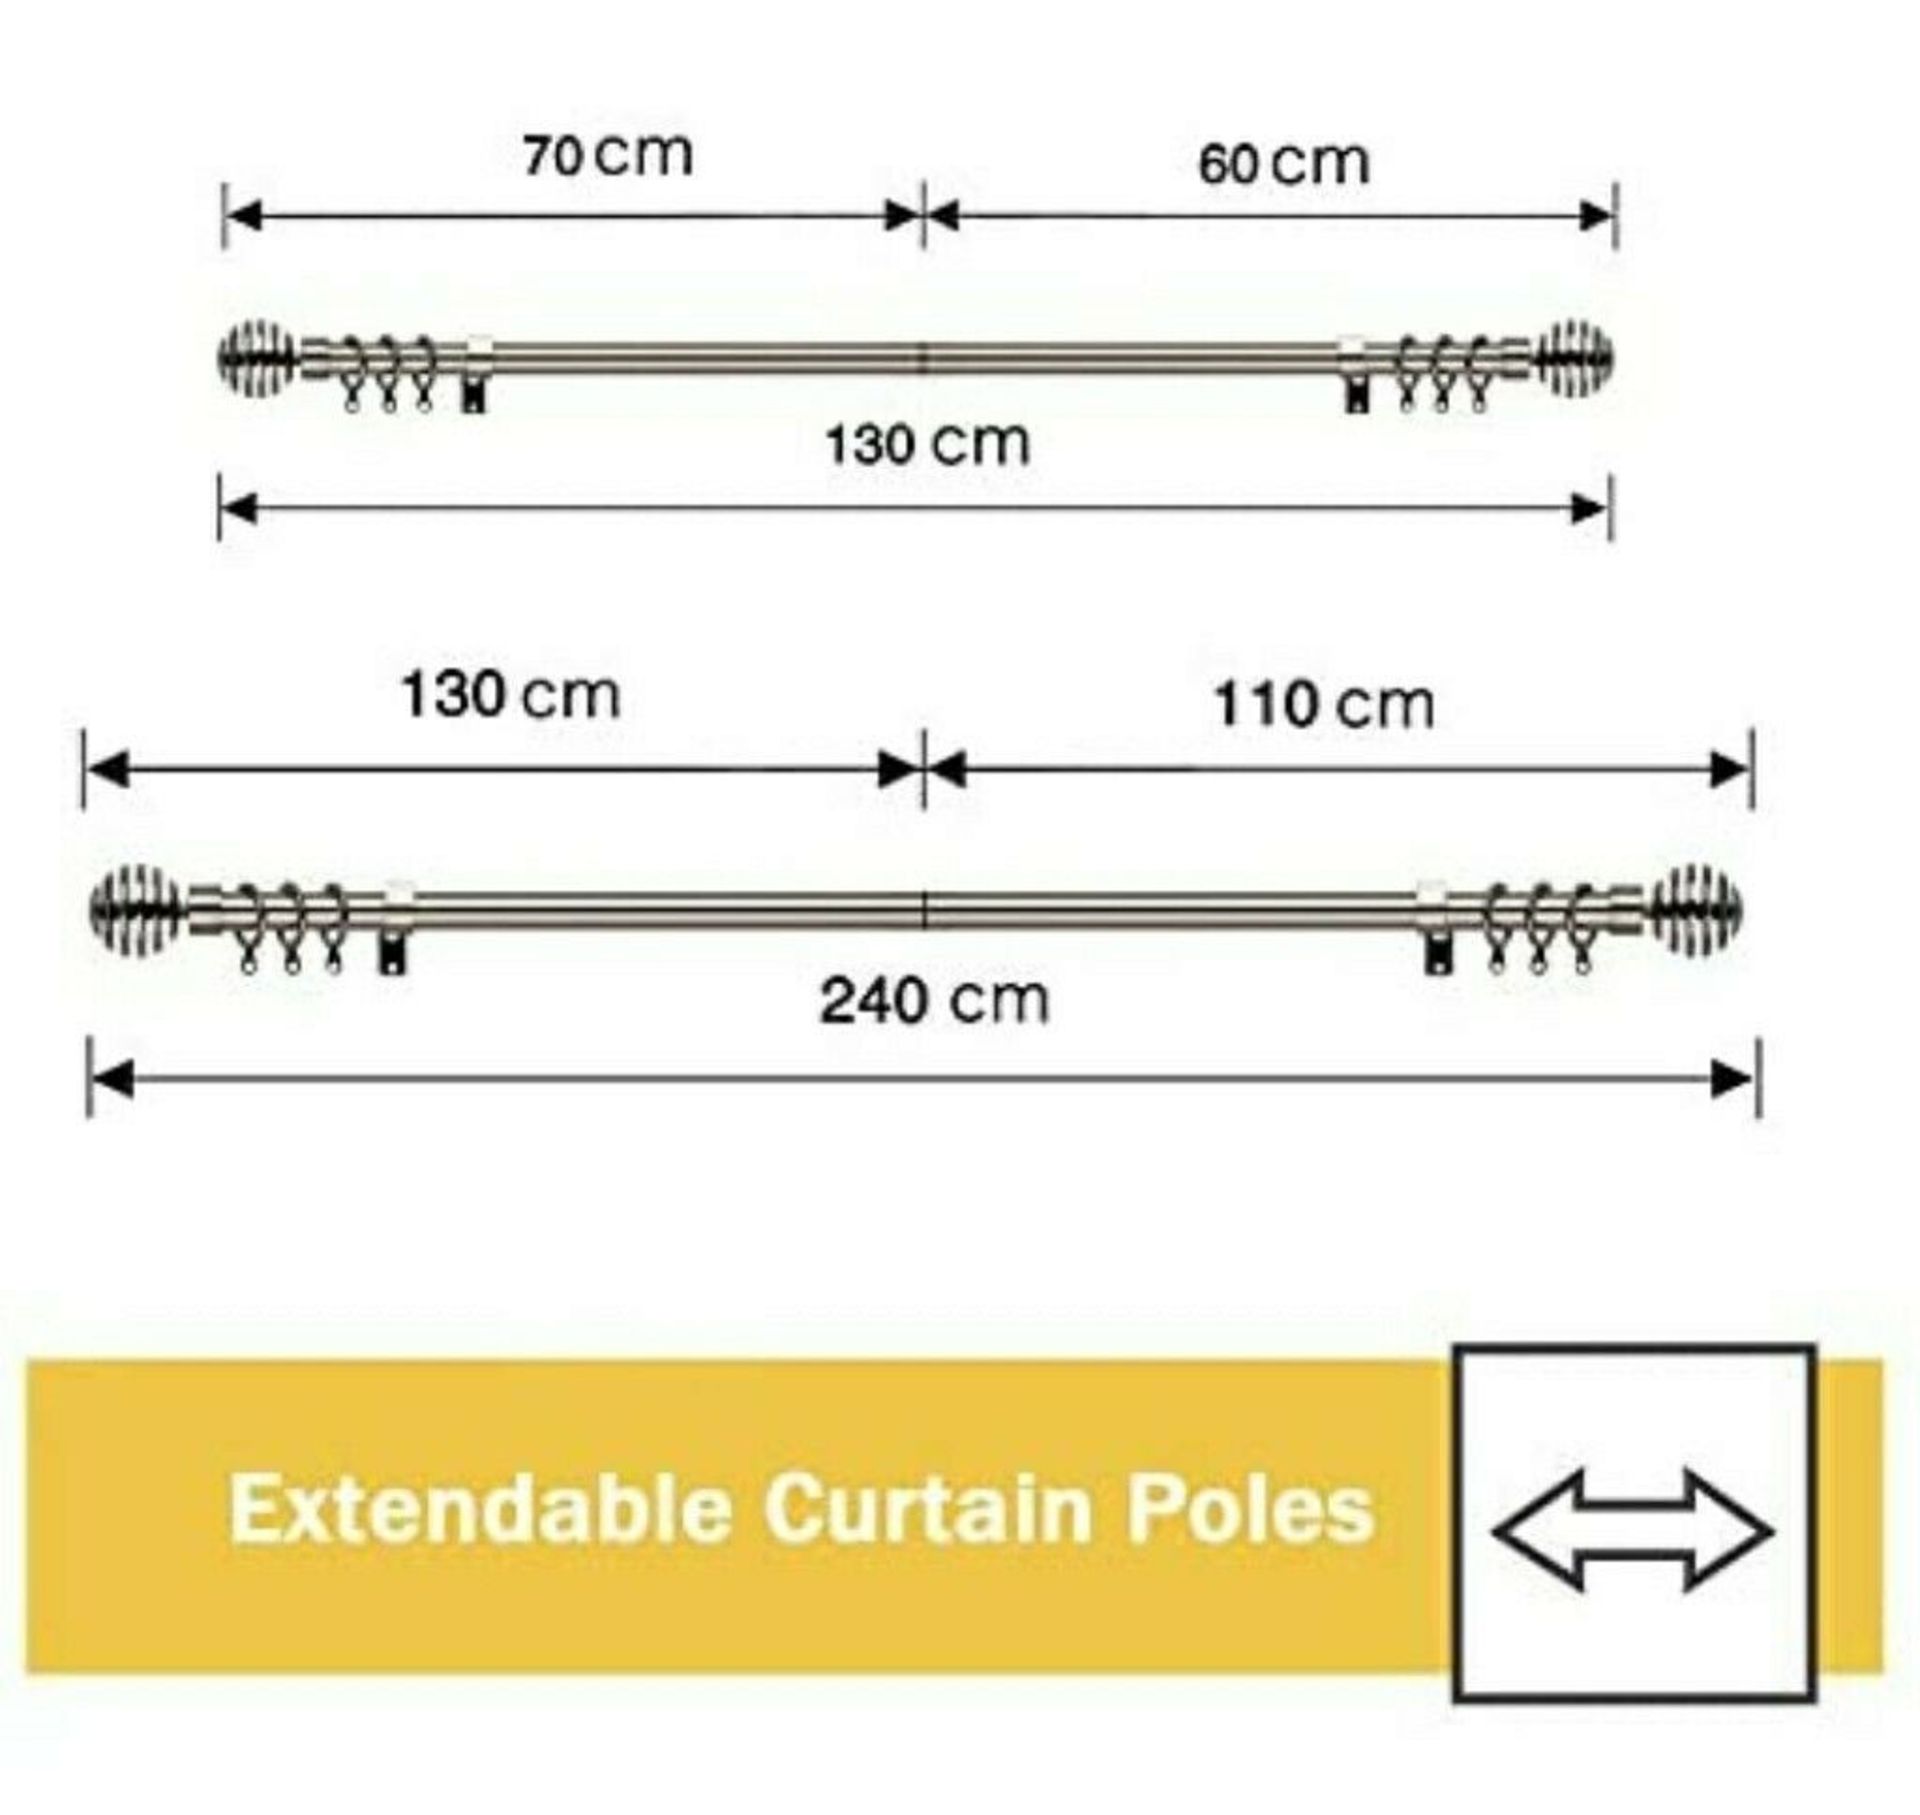 200 Brand New Quality Curtain Poles RRP £5798.00 - Image 8 of 9